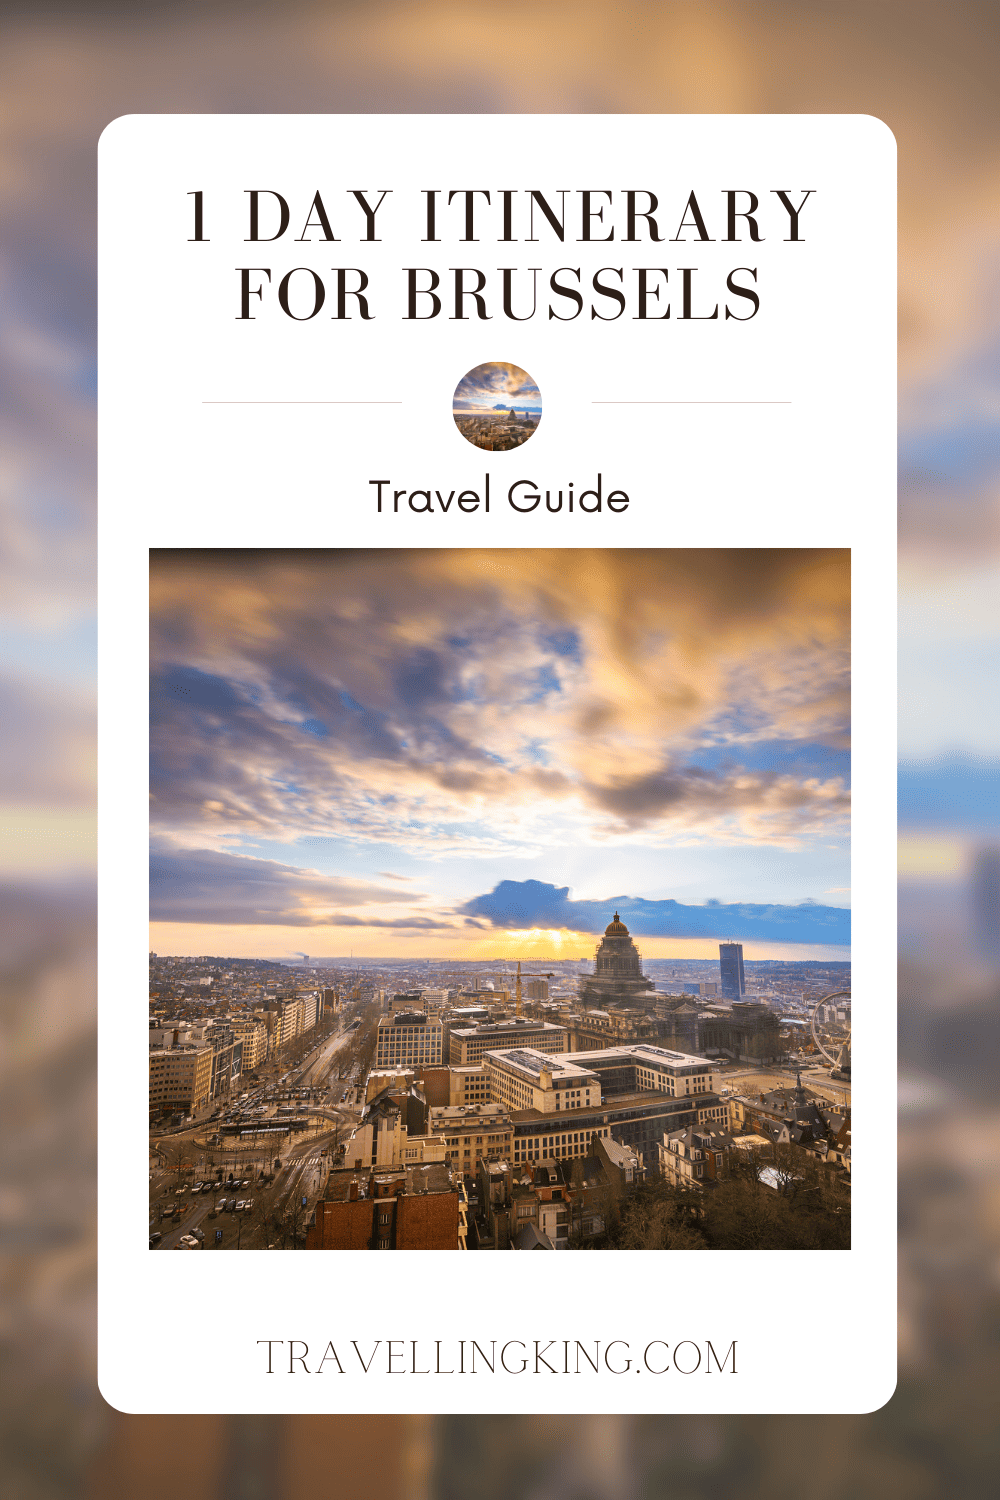 1 Day Itinerary for Brussels